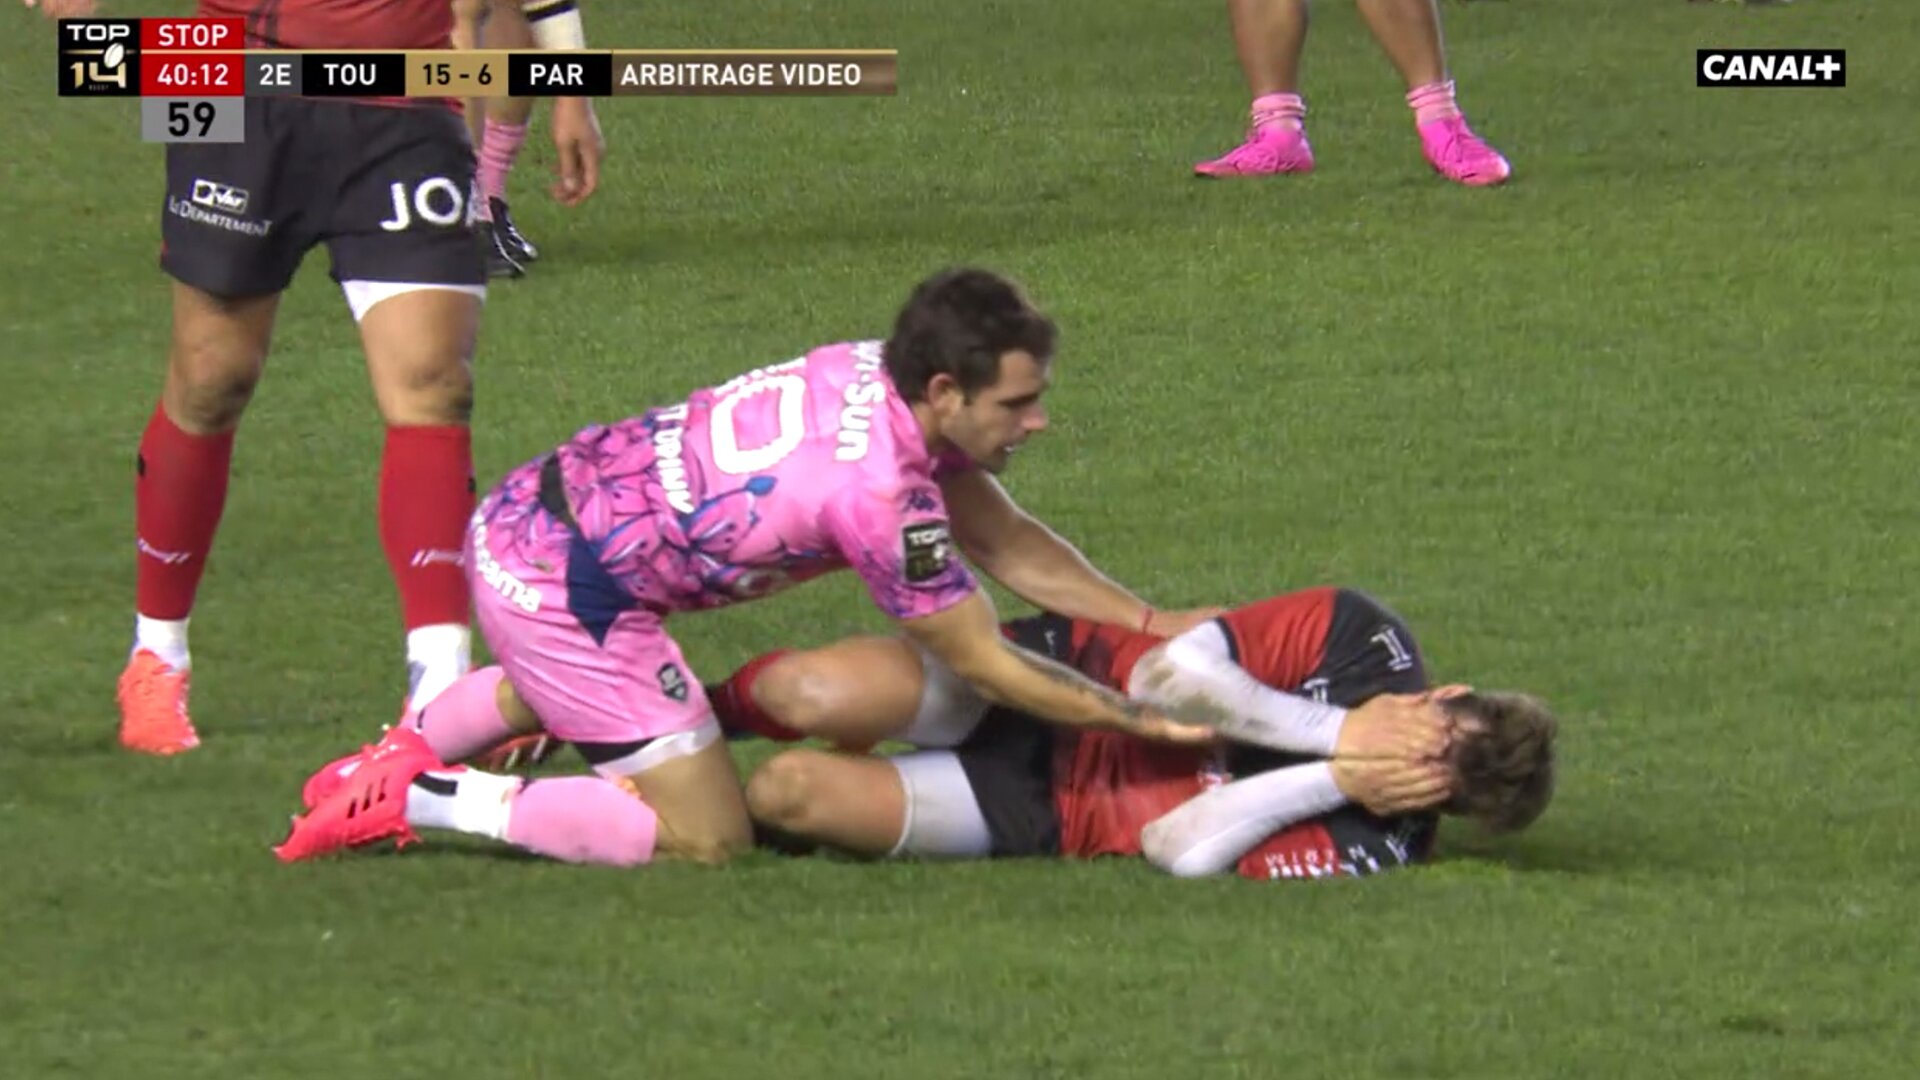 We witnessed one of the most surprisingly wholesome moments in French rugby this weekend